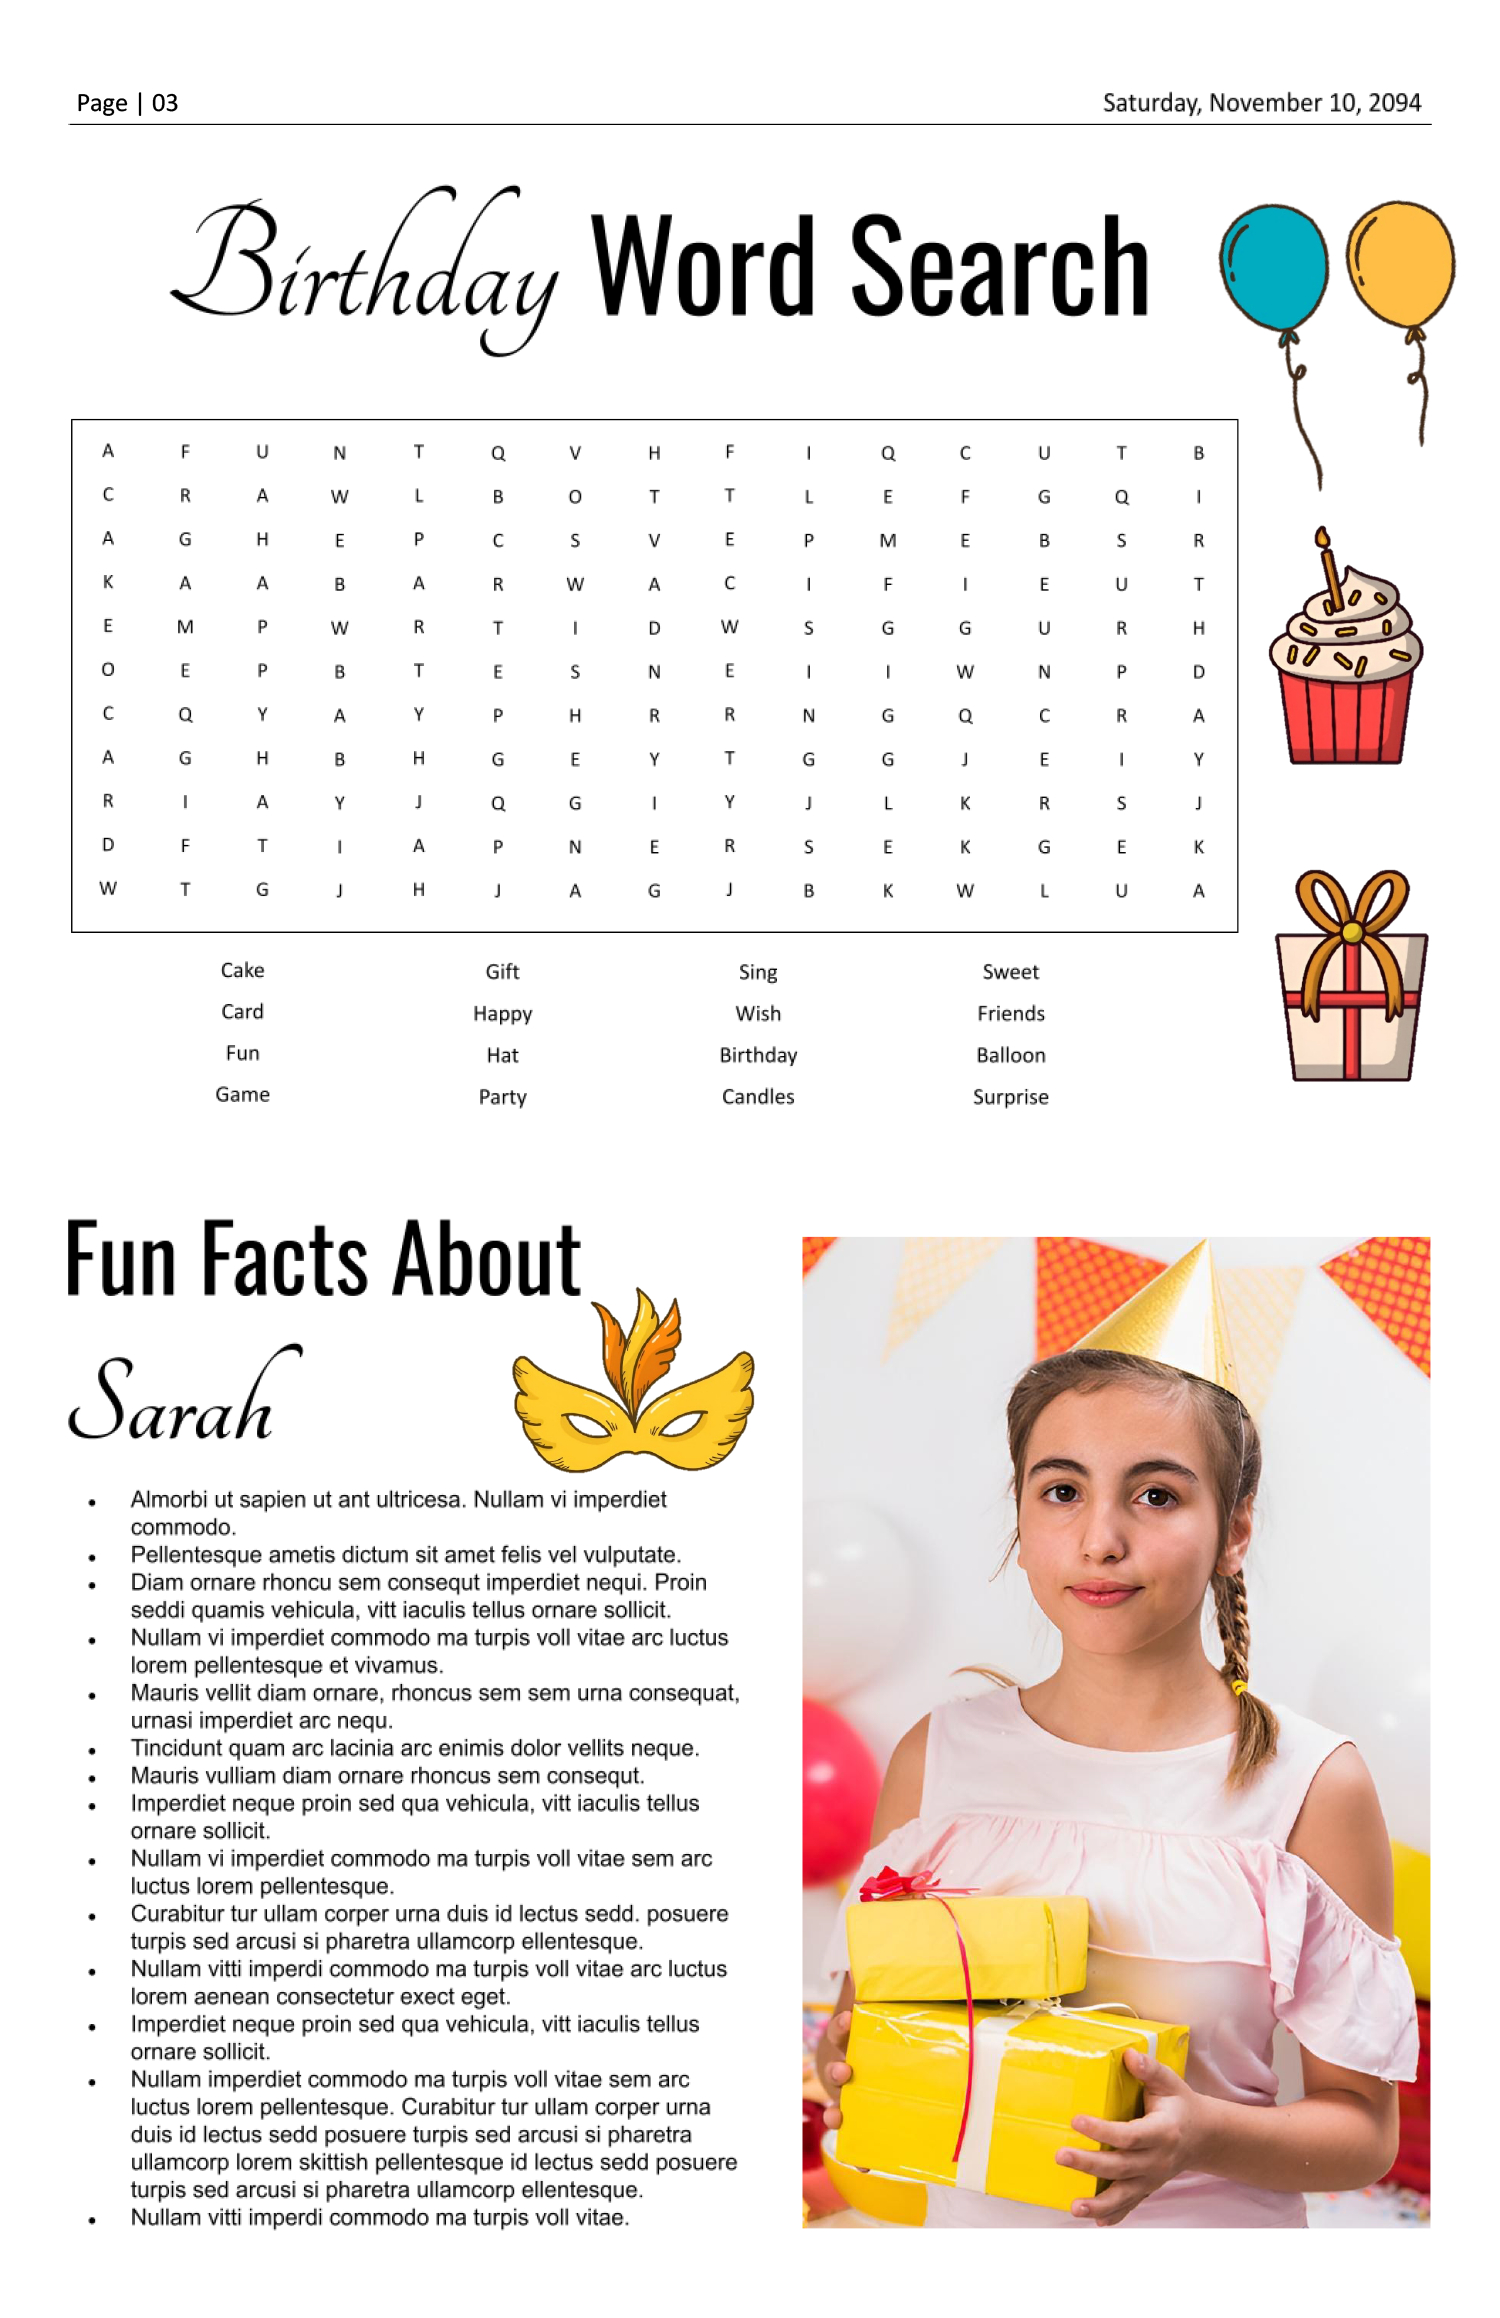 11×17 Tabloid Birthday Newspaper Template - Page 03